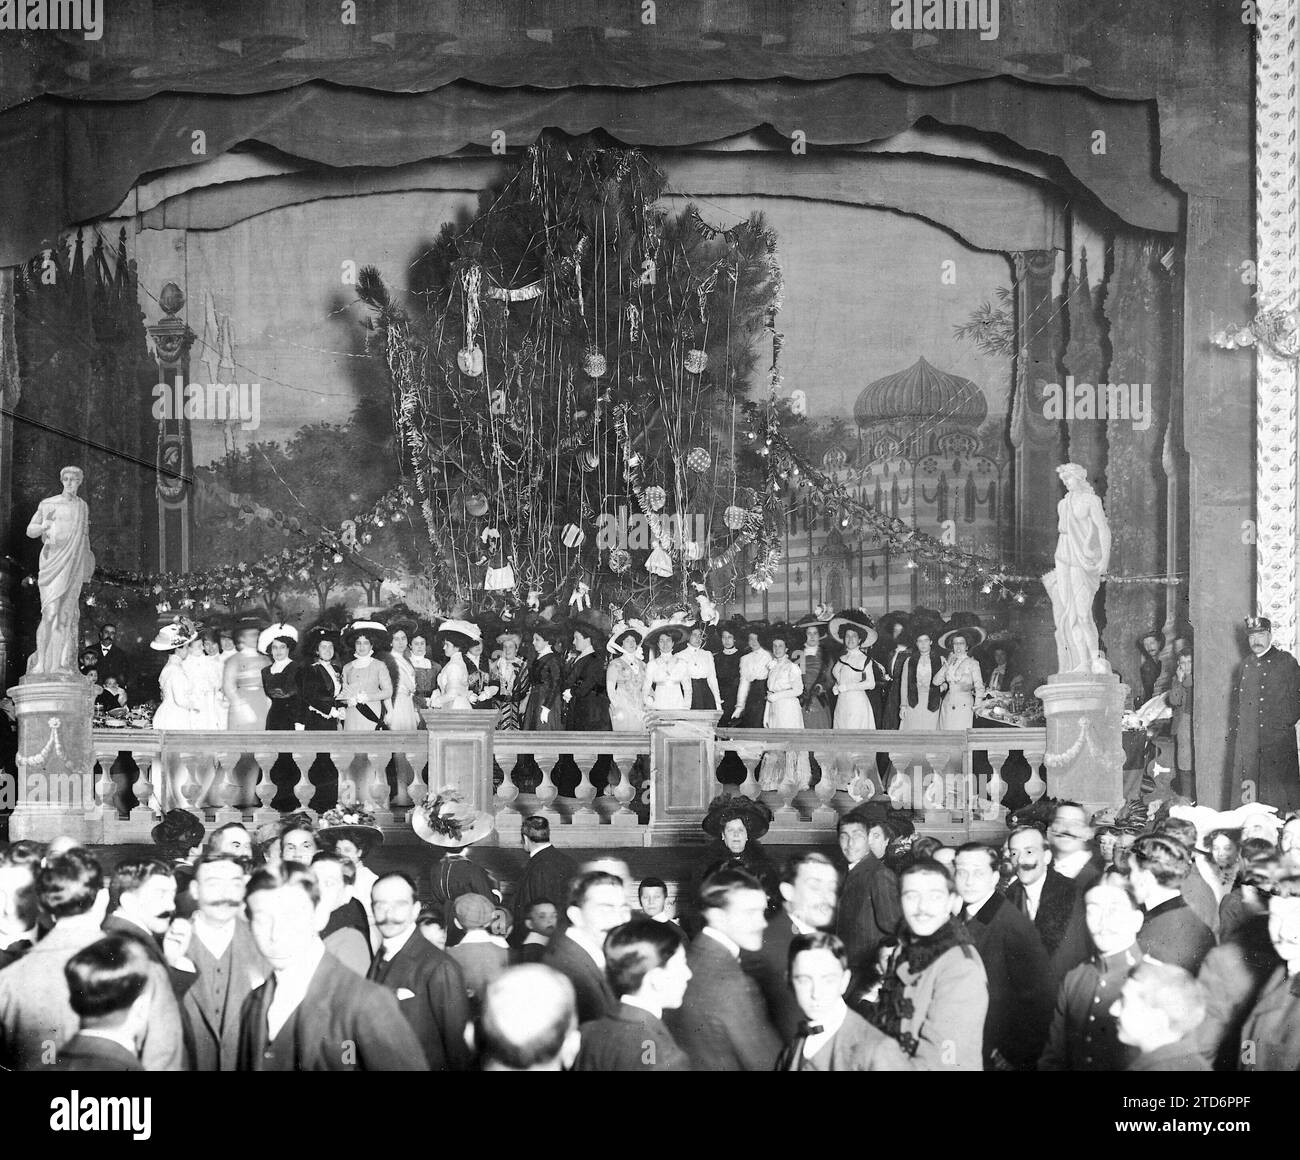 12/30/1908. La Coruña, a Charity party. The main theater during the Christmas tree festival Organized by the Countess of Pardo Bazán For the benefit of the Shipwrecked of the Steamboat 'Unión'. Photo: Ferrer. Credit: Album / Archivo ABC Stock Photo